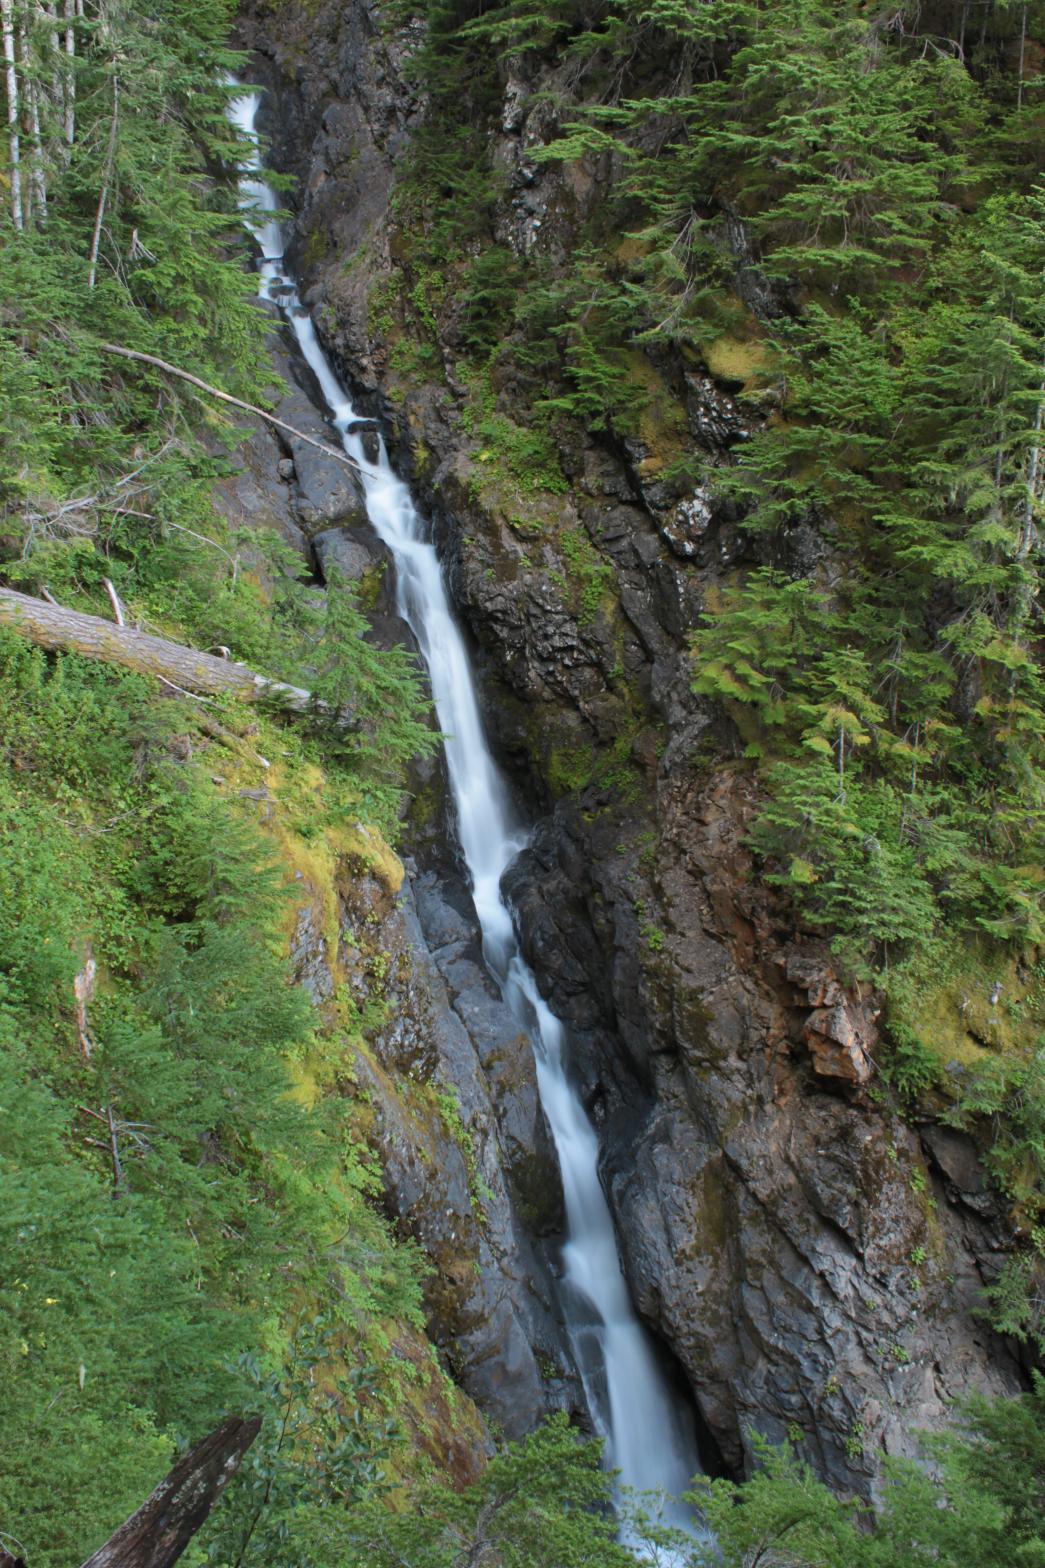 Lower section of Tennant Falls